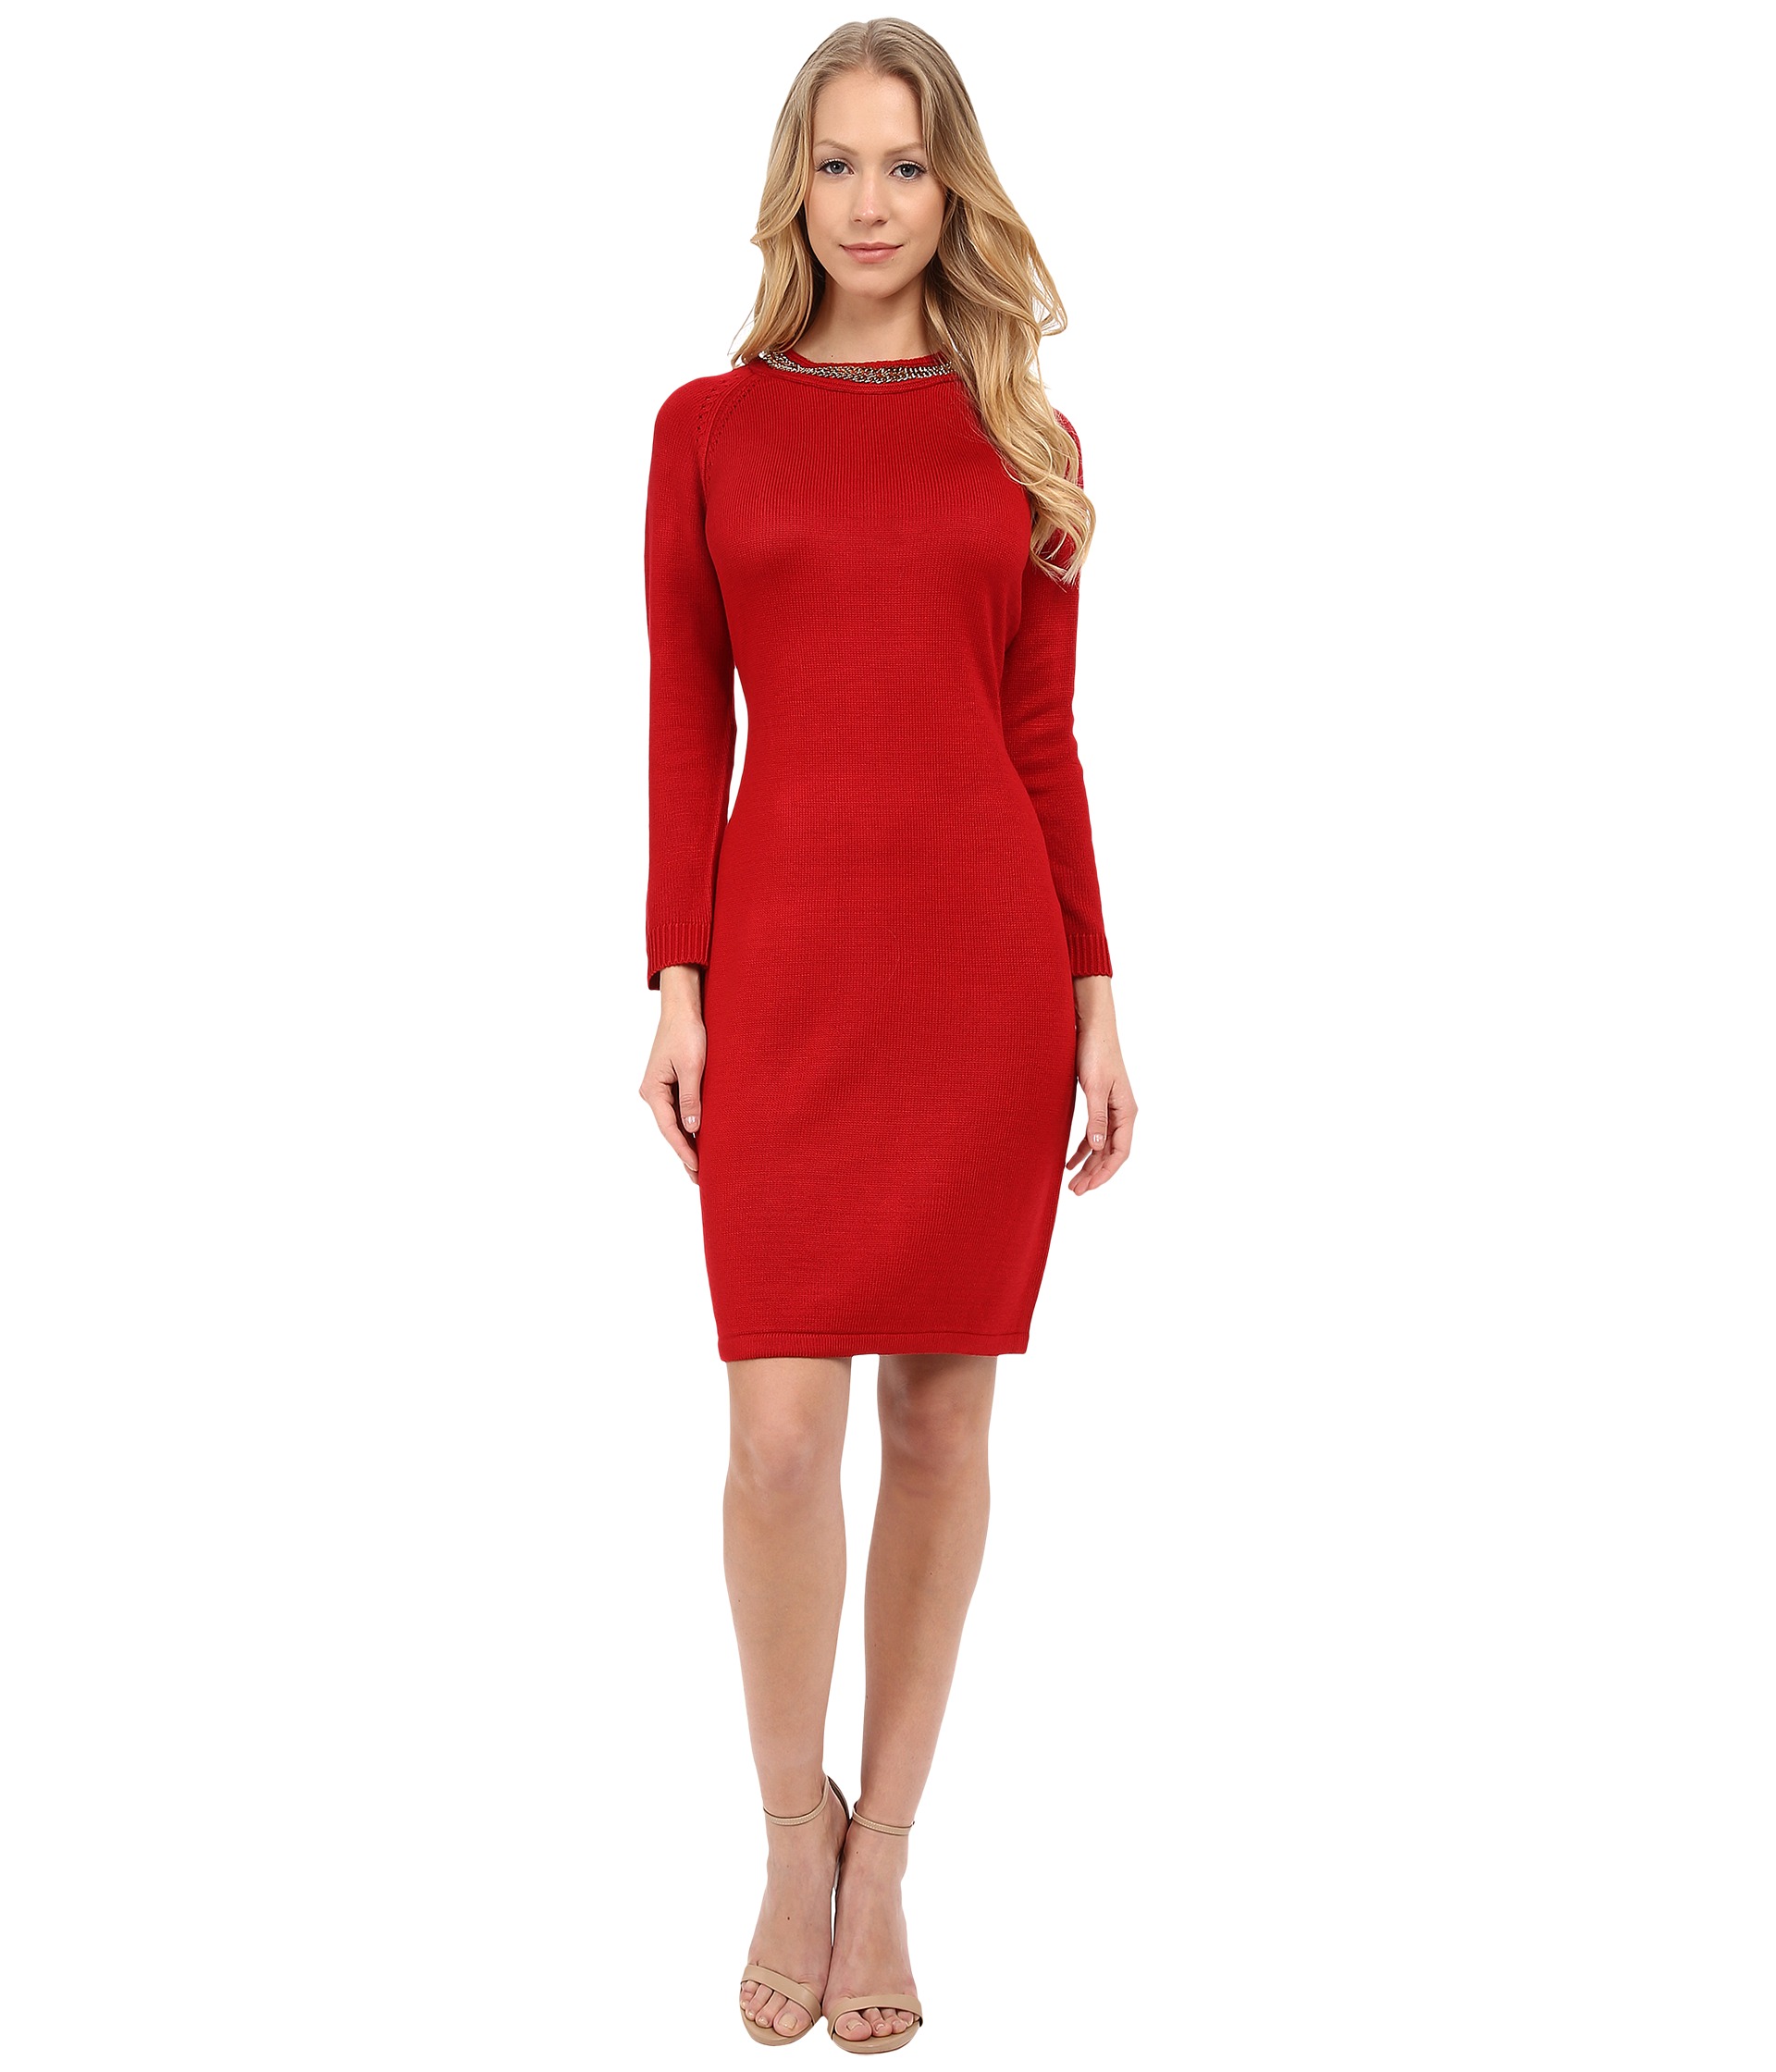 Calvin Klein Long Sleeve Sweater Dress with Chain Detail